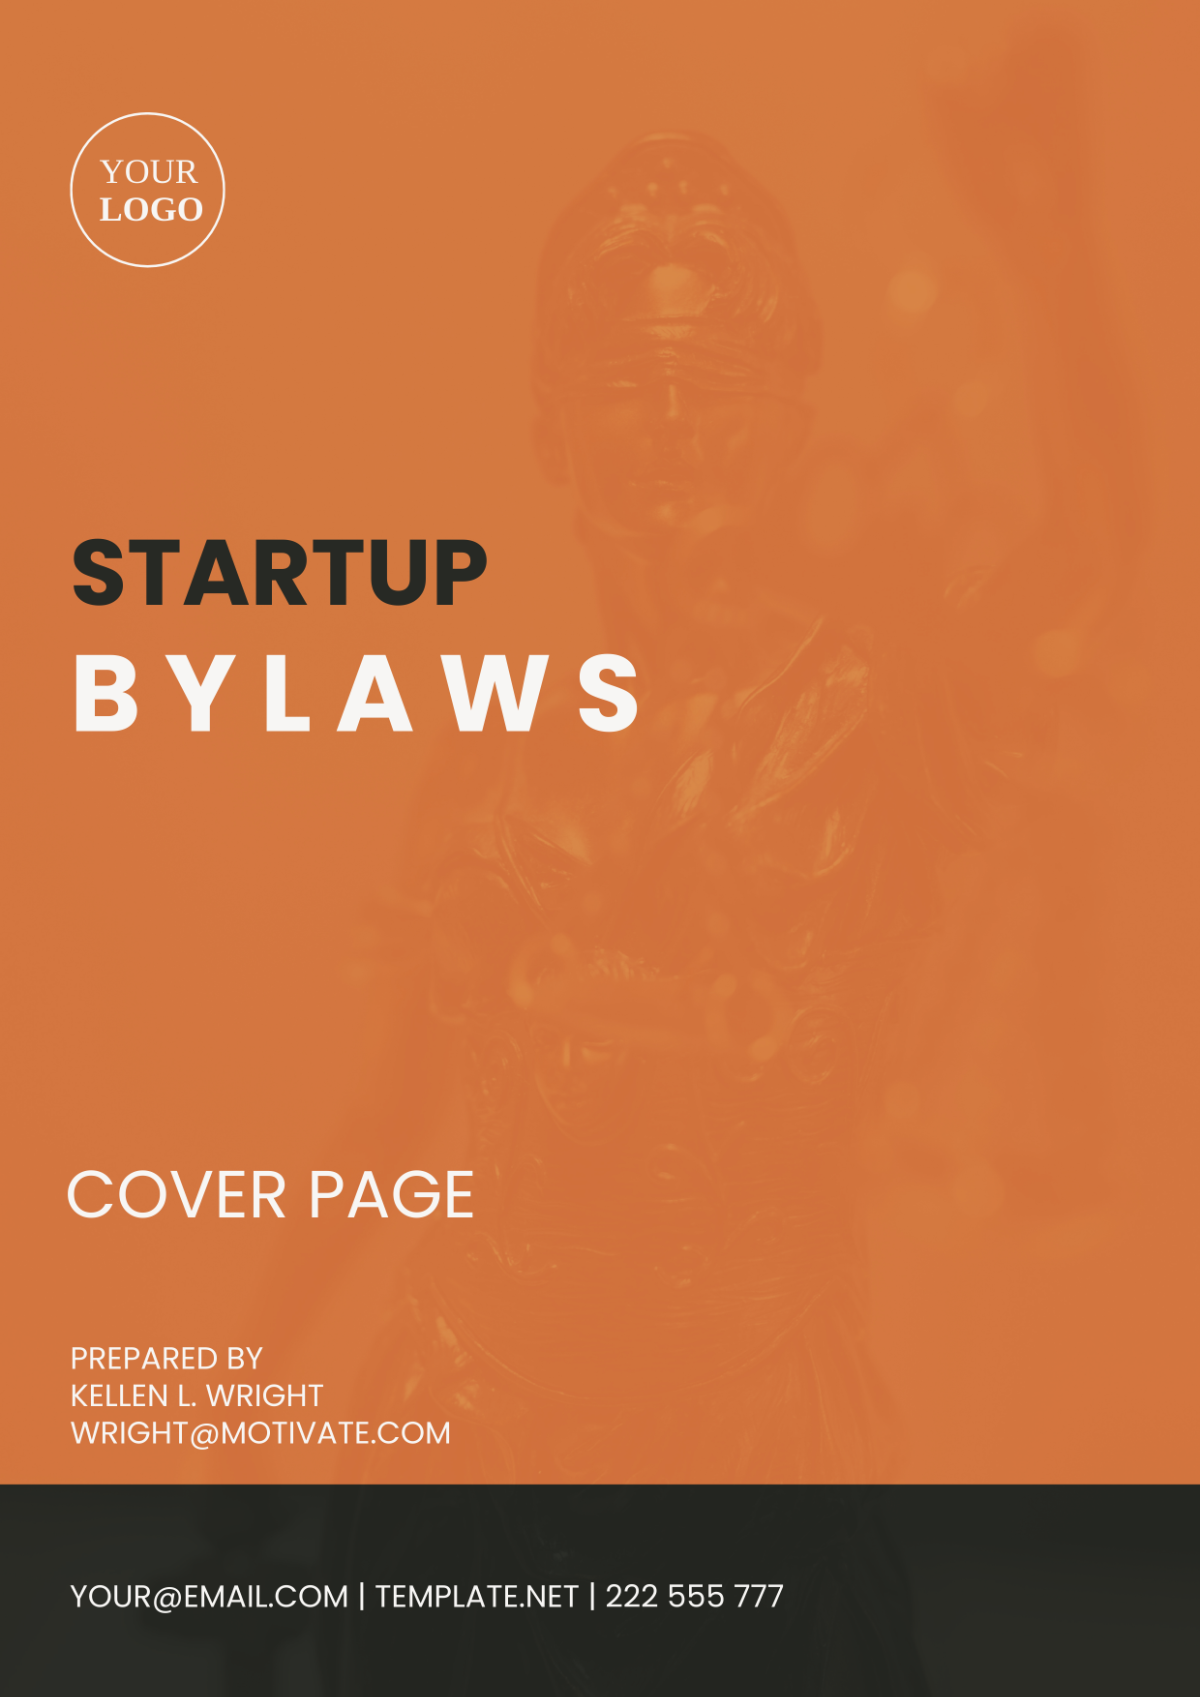 Startup Bylaws Cover Page